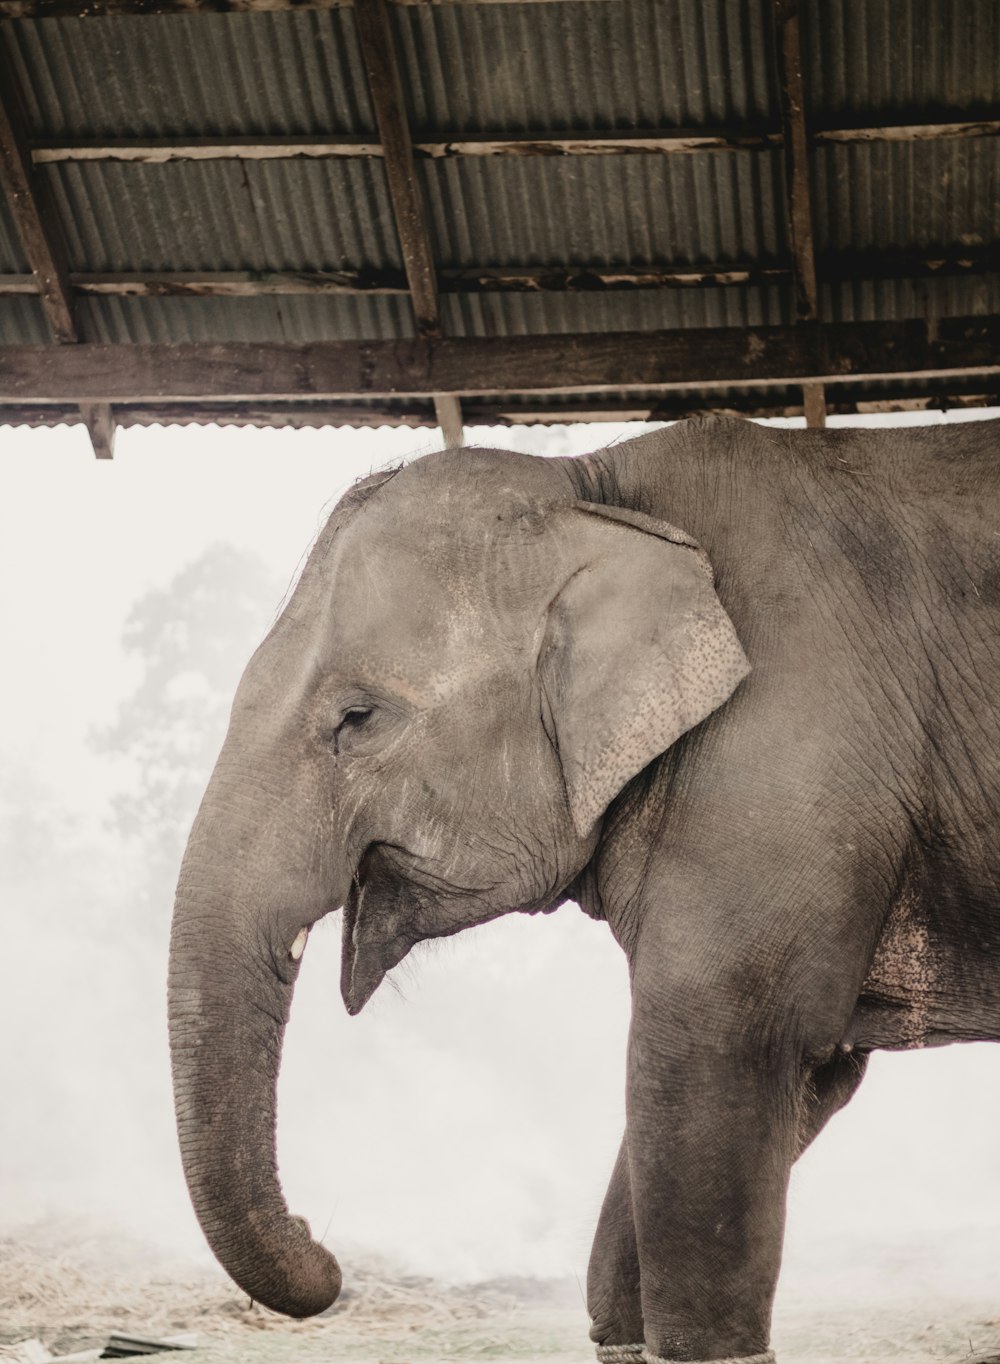 a large elephant standing under a wooden structure